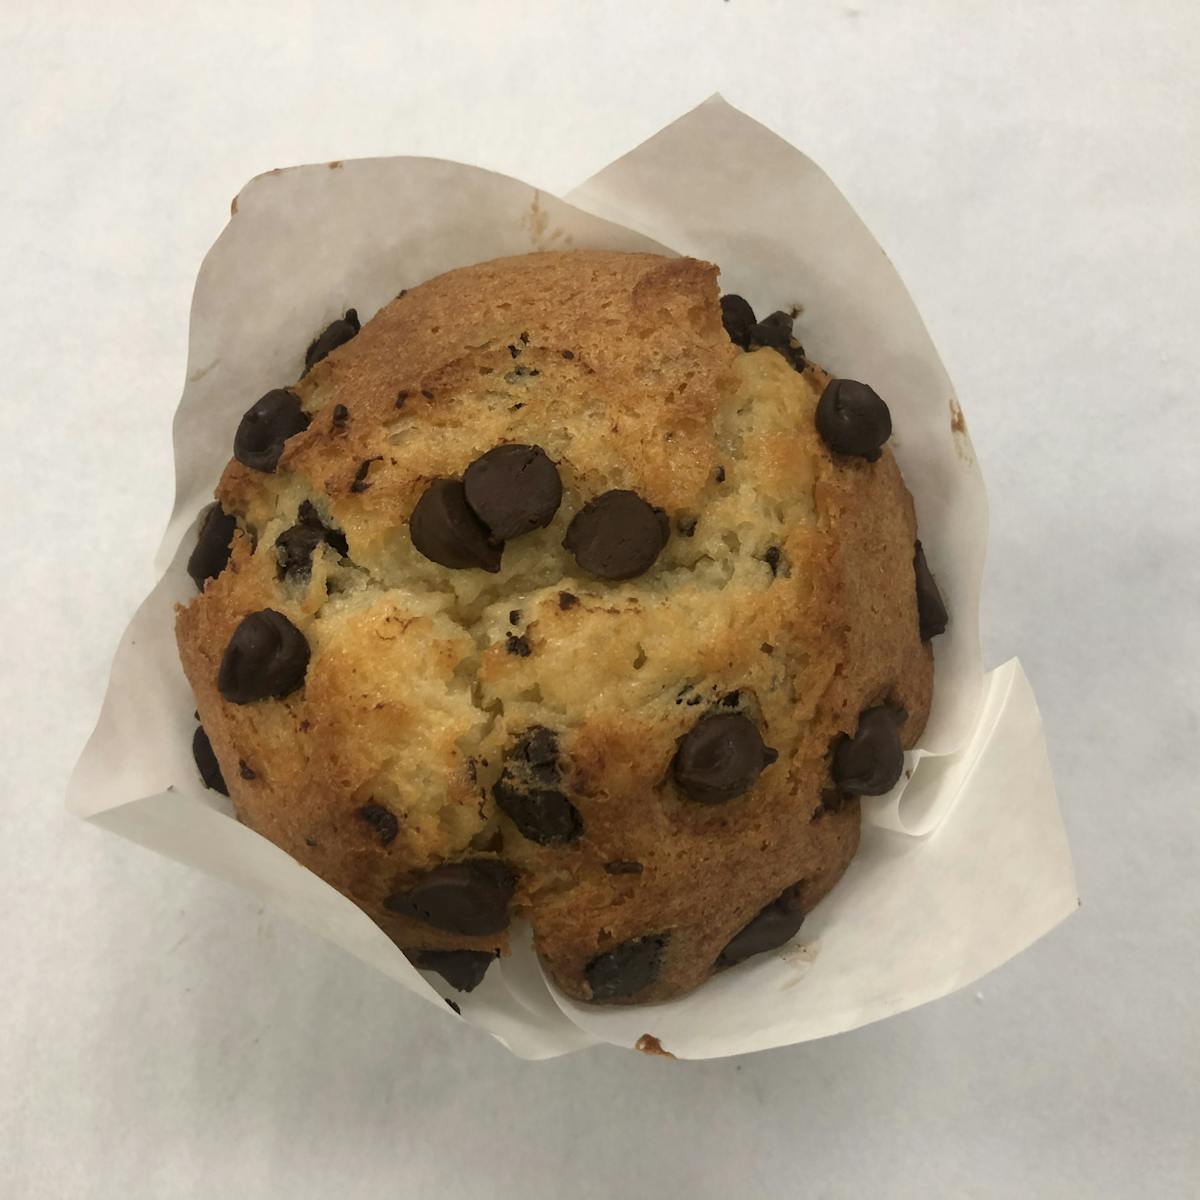 a muffin with chocolate chips